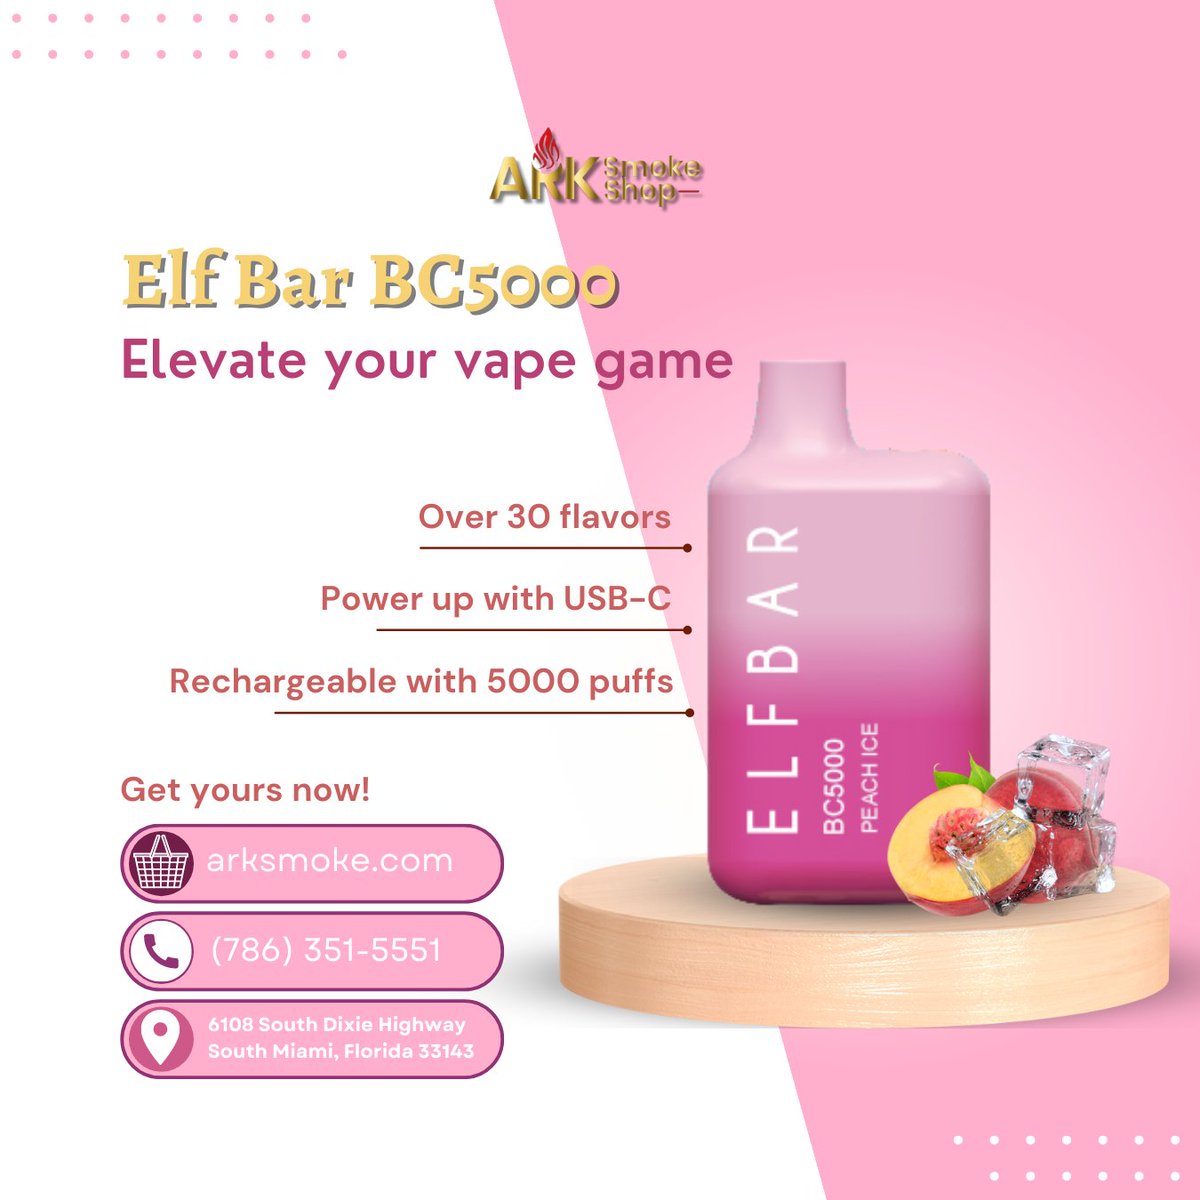 Introducing the mouthwatering Elf Bar in peached flavor! 🍑🔋 Get ready for an unforgettable vaping experience with 5,000 puffs of pure peachy bliss. 
💡 Say goodbye to disposable hassle⚡️💯

#ArksmokeShop #VapeWithFlavor #ElfBarPeached #30FlavorsToChooseFrom #RechargeableVape